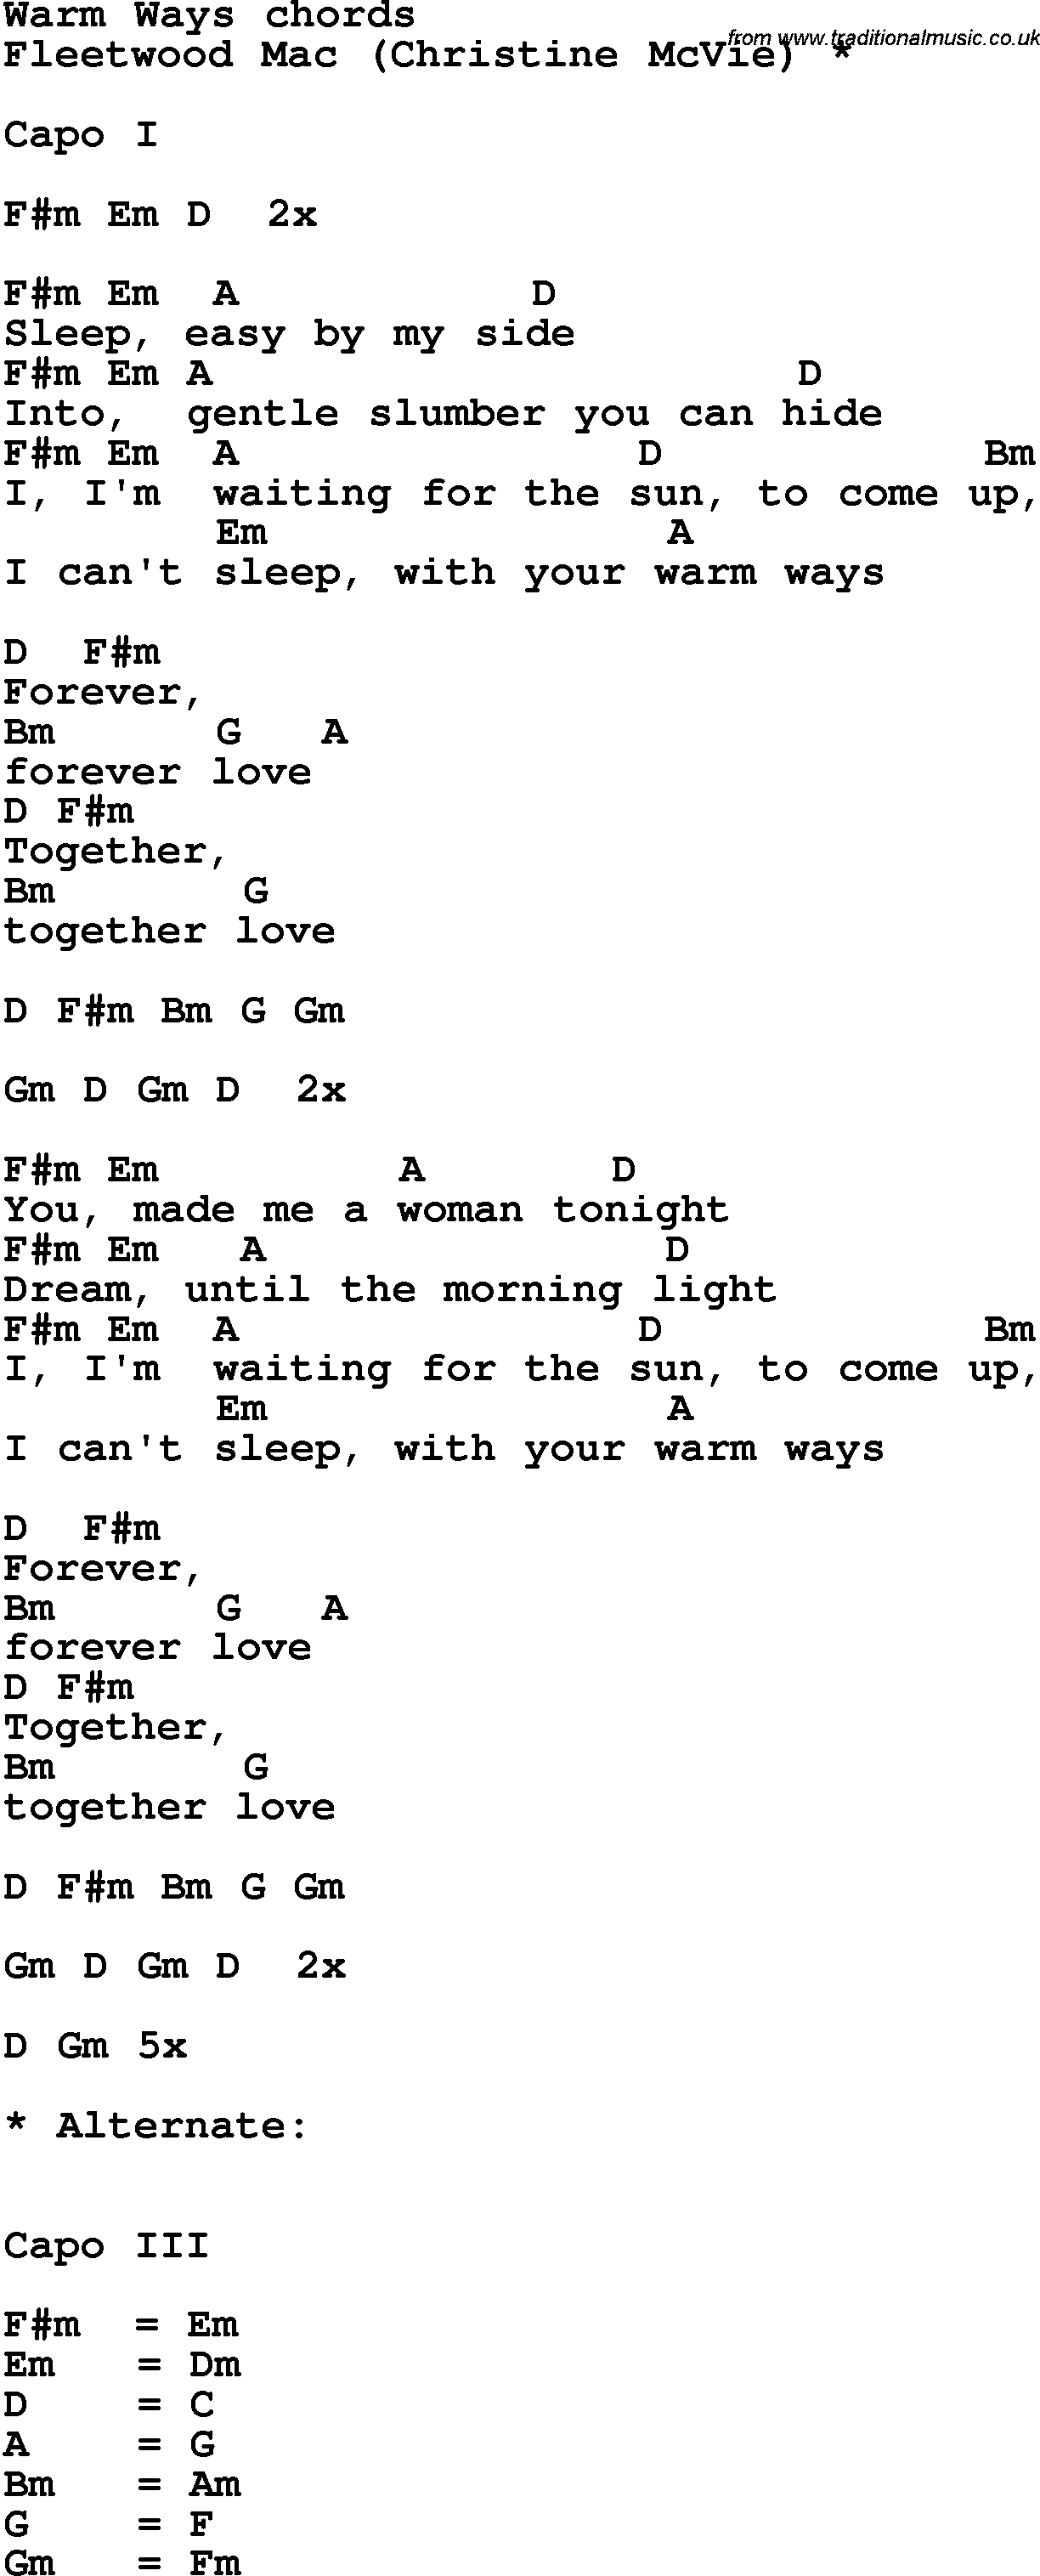 Song Lyrics with guitar chords for Warm Ways